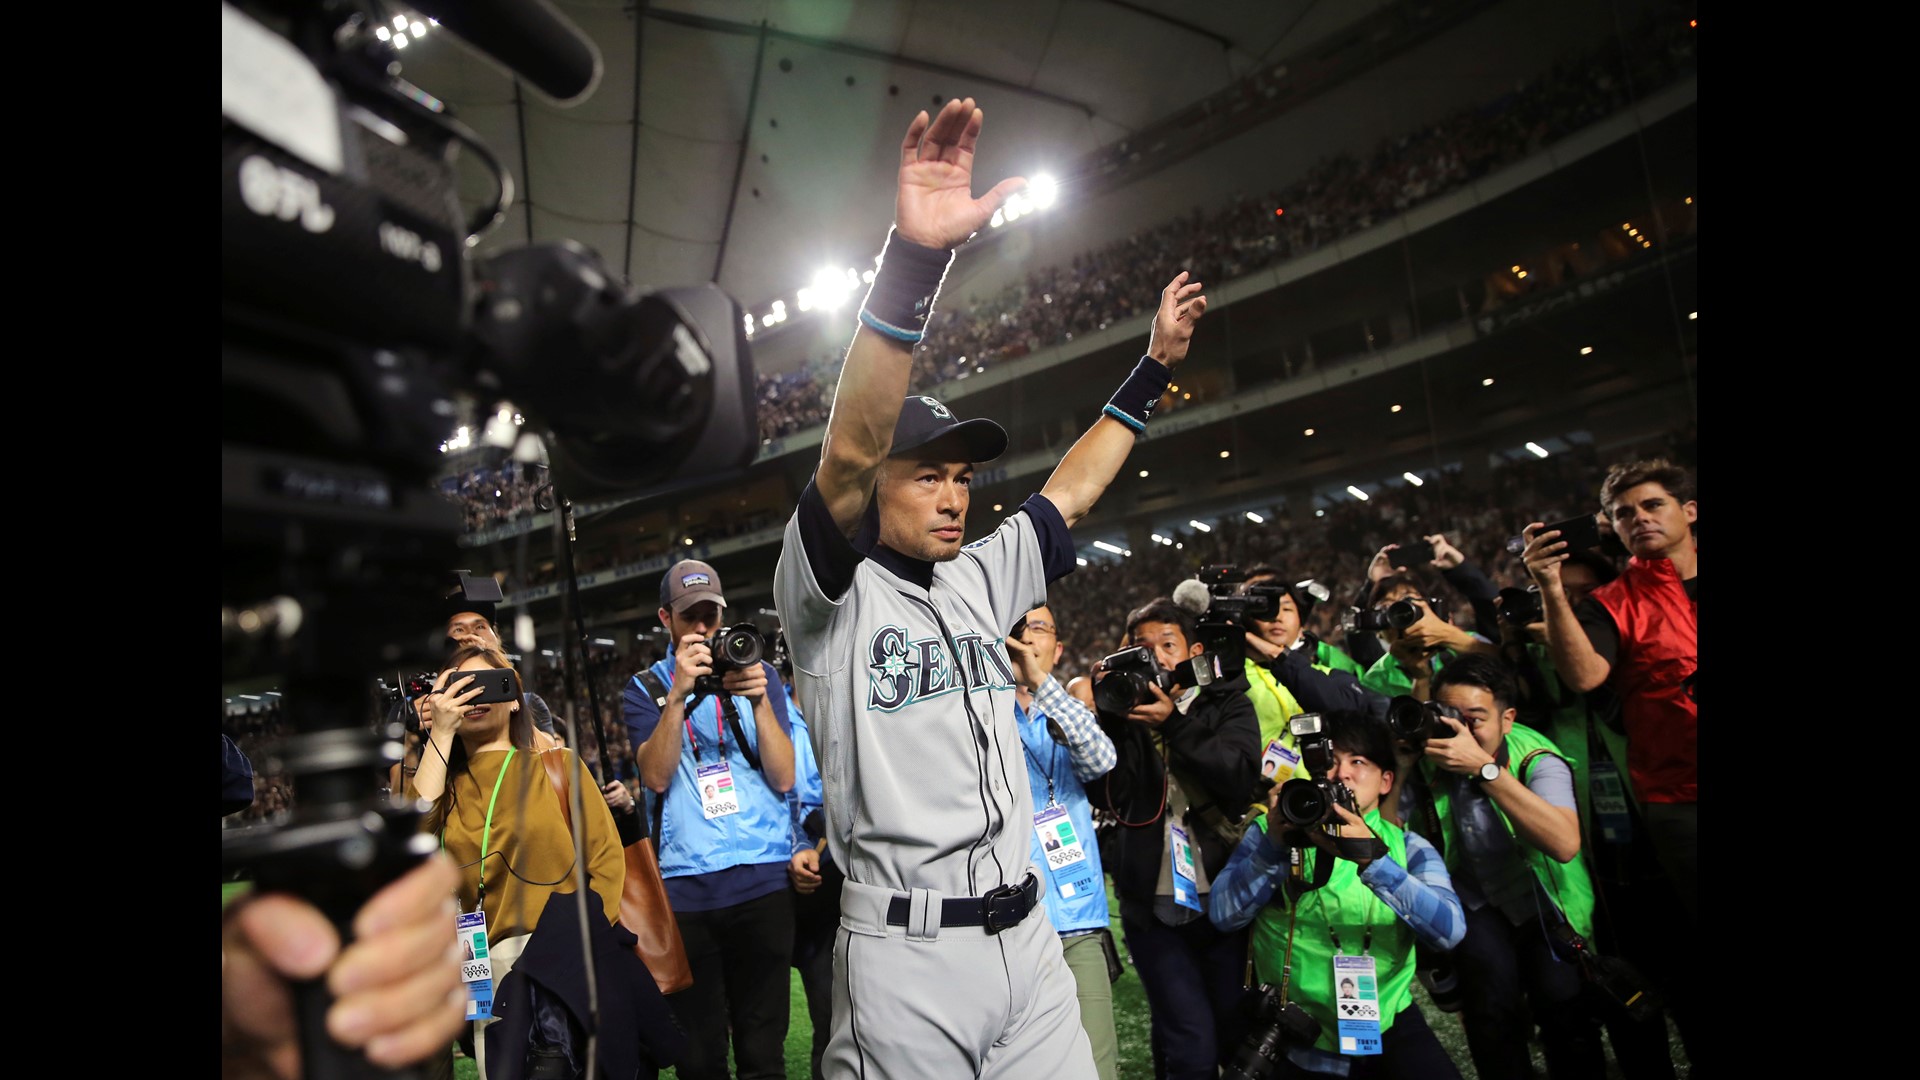 Mariners legend Ichiro Suzuki ended his storied career as a Mariner in front of a huge crowd in the Tokyo Dome.